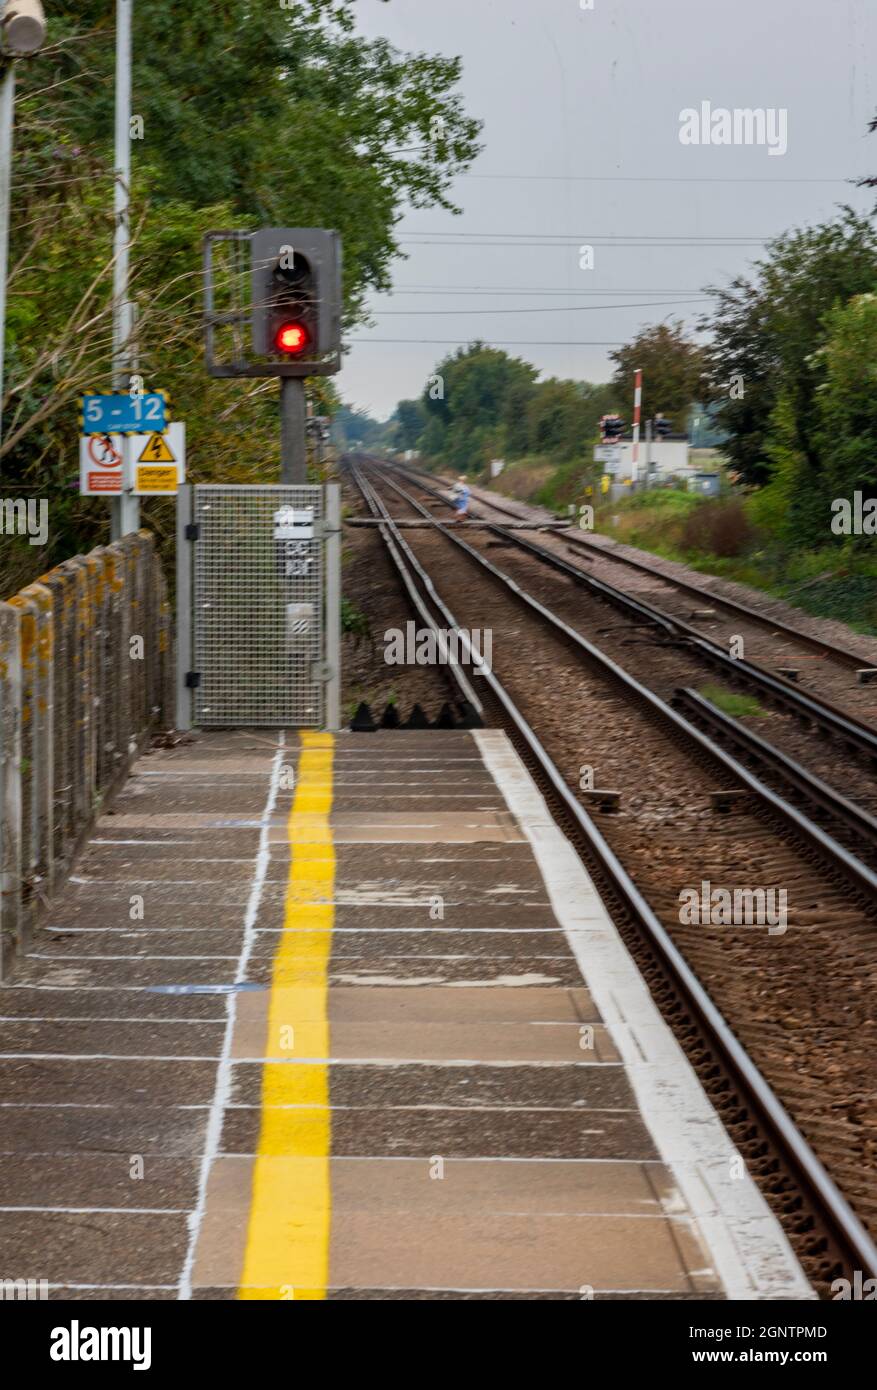 Railway trains station platform and rail tracks with a red signal at the end of the platform and lines tapering to a vanishing or disappearing point Stock Photo